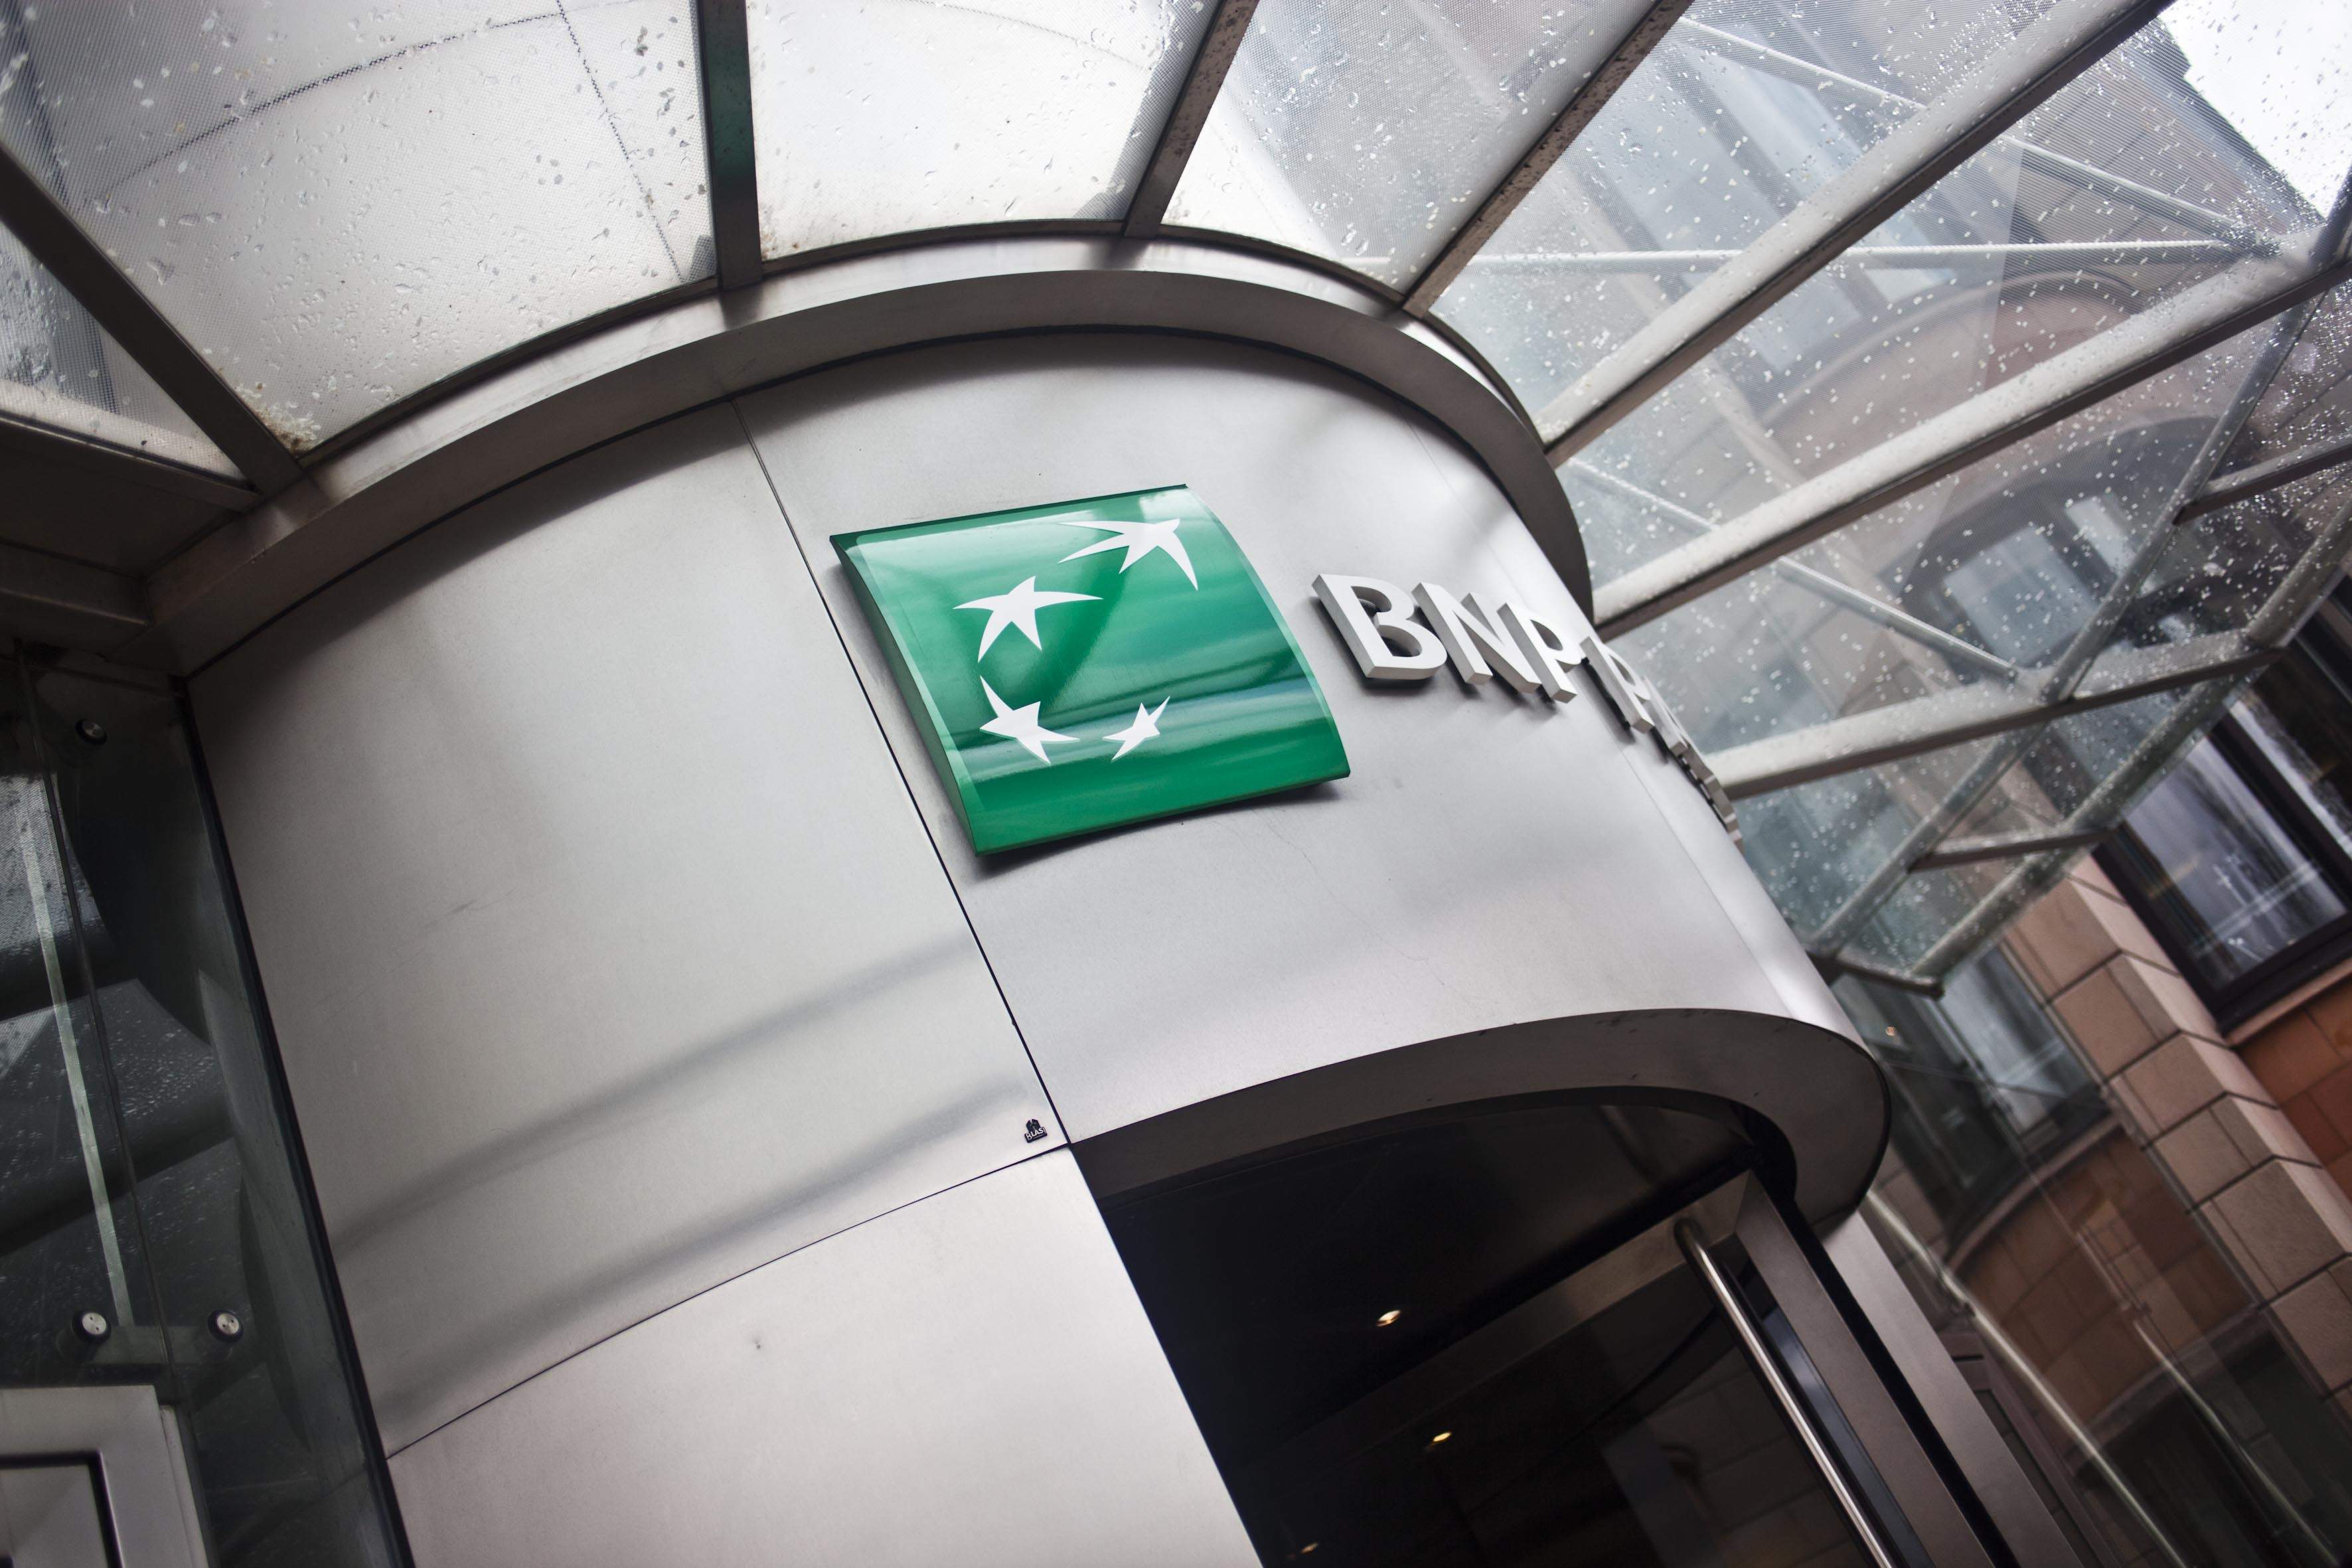 BNP Paribas Personal Finance motor products roll out in the UK